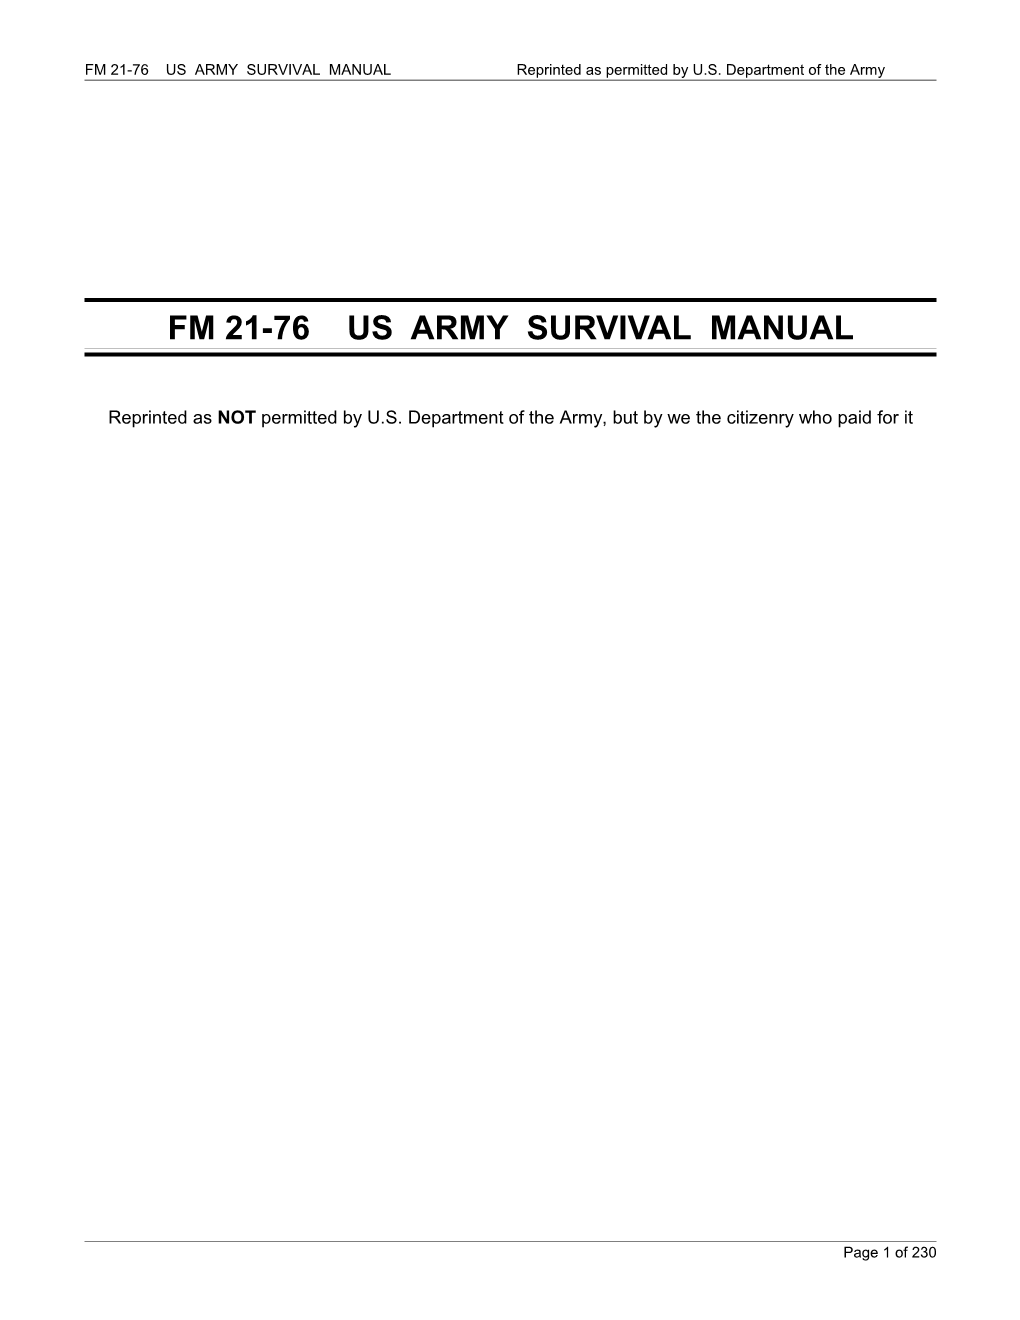 FM 21-76 US ARMY SURVIVAL MANUAL Reprinted As Permitted by U.S. Department of the Army